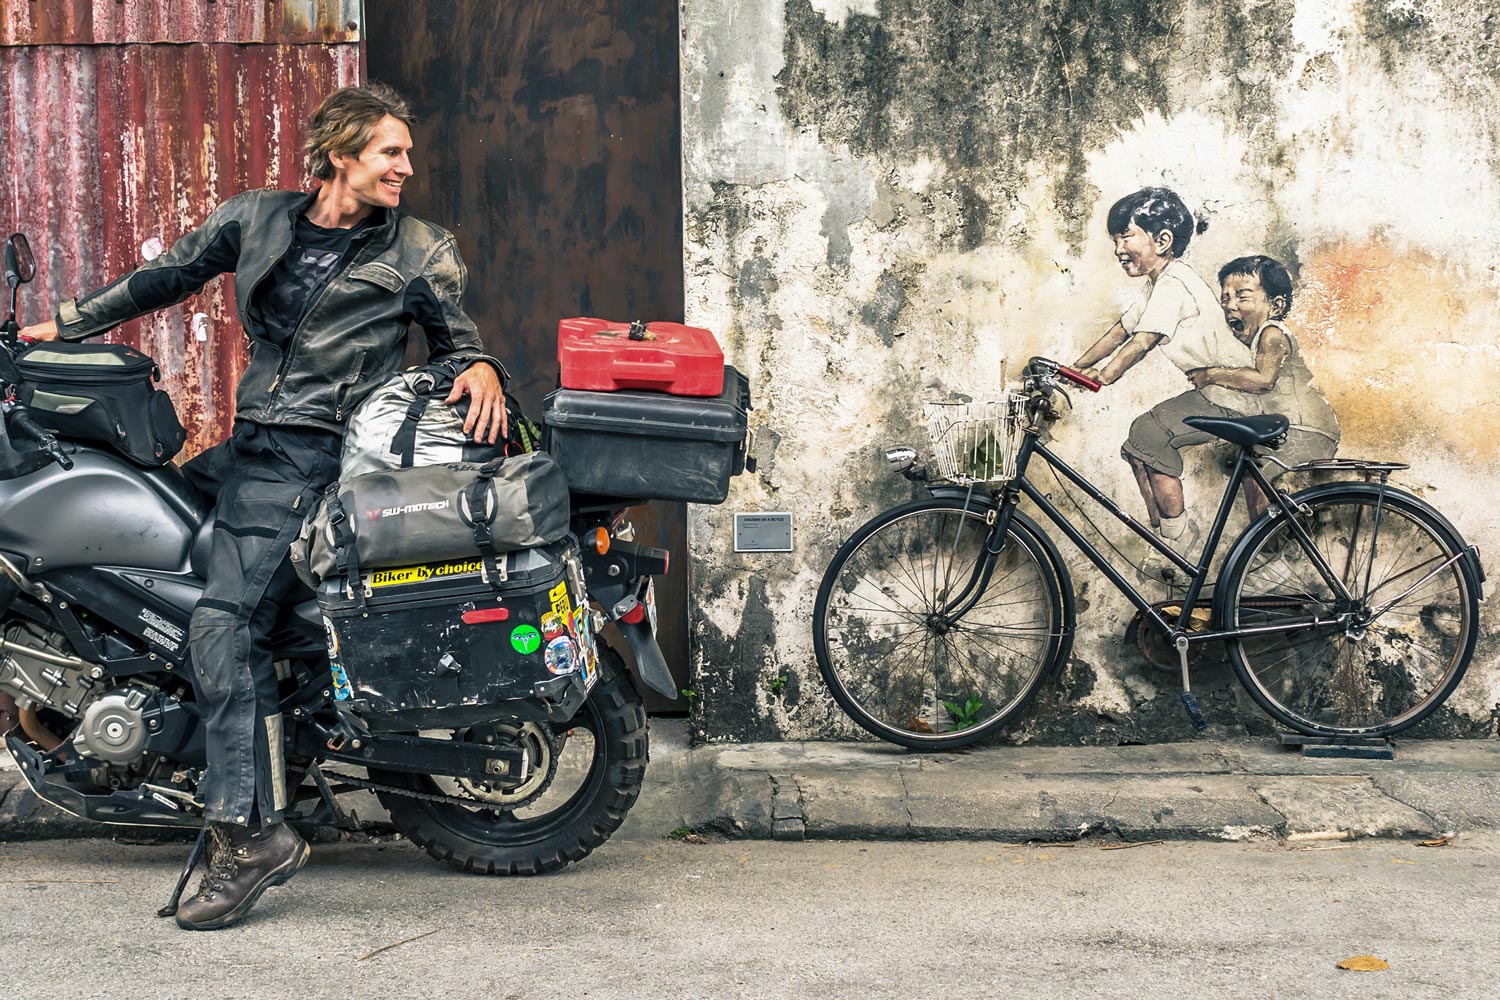 Eric Bernath stops his motorcycle on a Malaysian street to look at mural of two small children with a bicycle in front of it that looks they are riding it